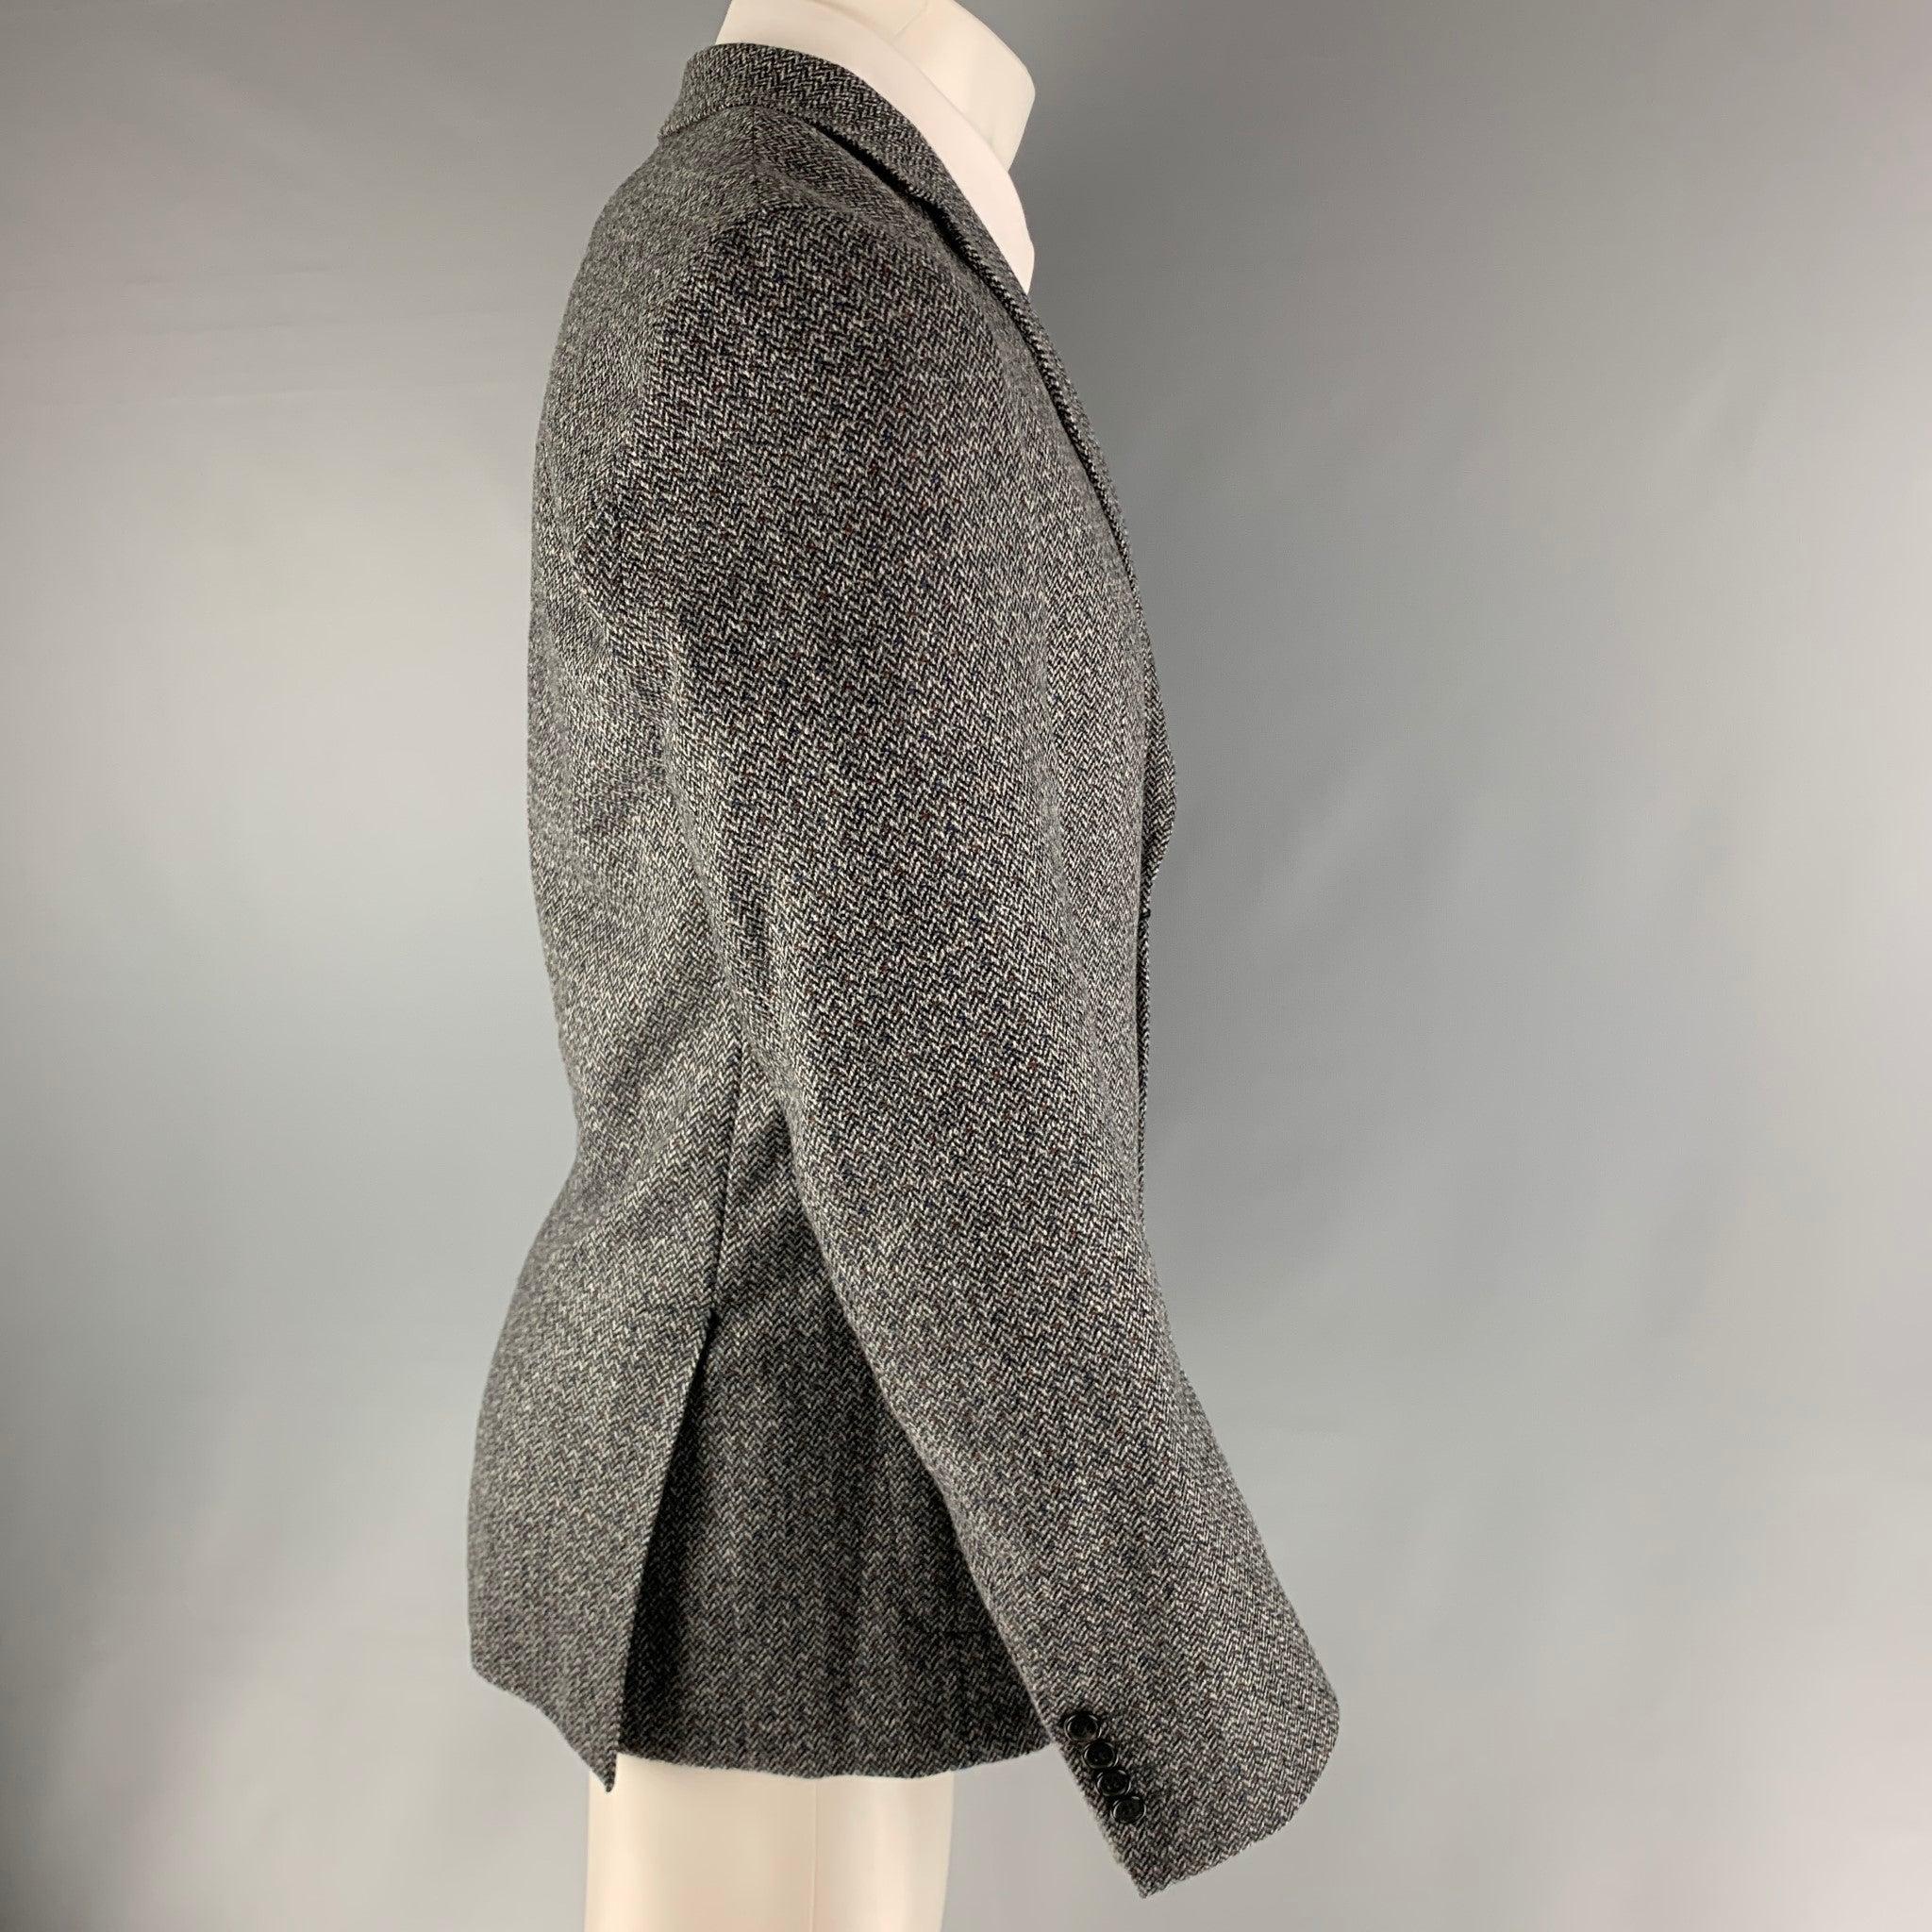 PAUL SMITH sport coat comes in a grey wool and cashmere blend featuring a single breasted cut, patch pockets, and a grey herringbone pattern. Made in Italy.New with tags. 

Marked:   40 

Measurements: 
 
Shoulder: 17 inches Chest: 40 inches Sleeve: